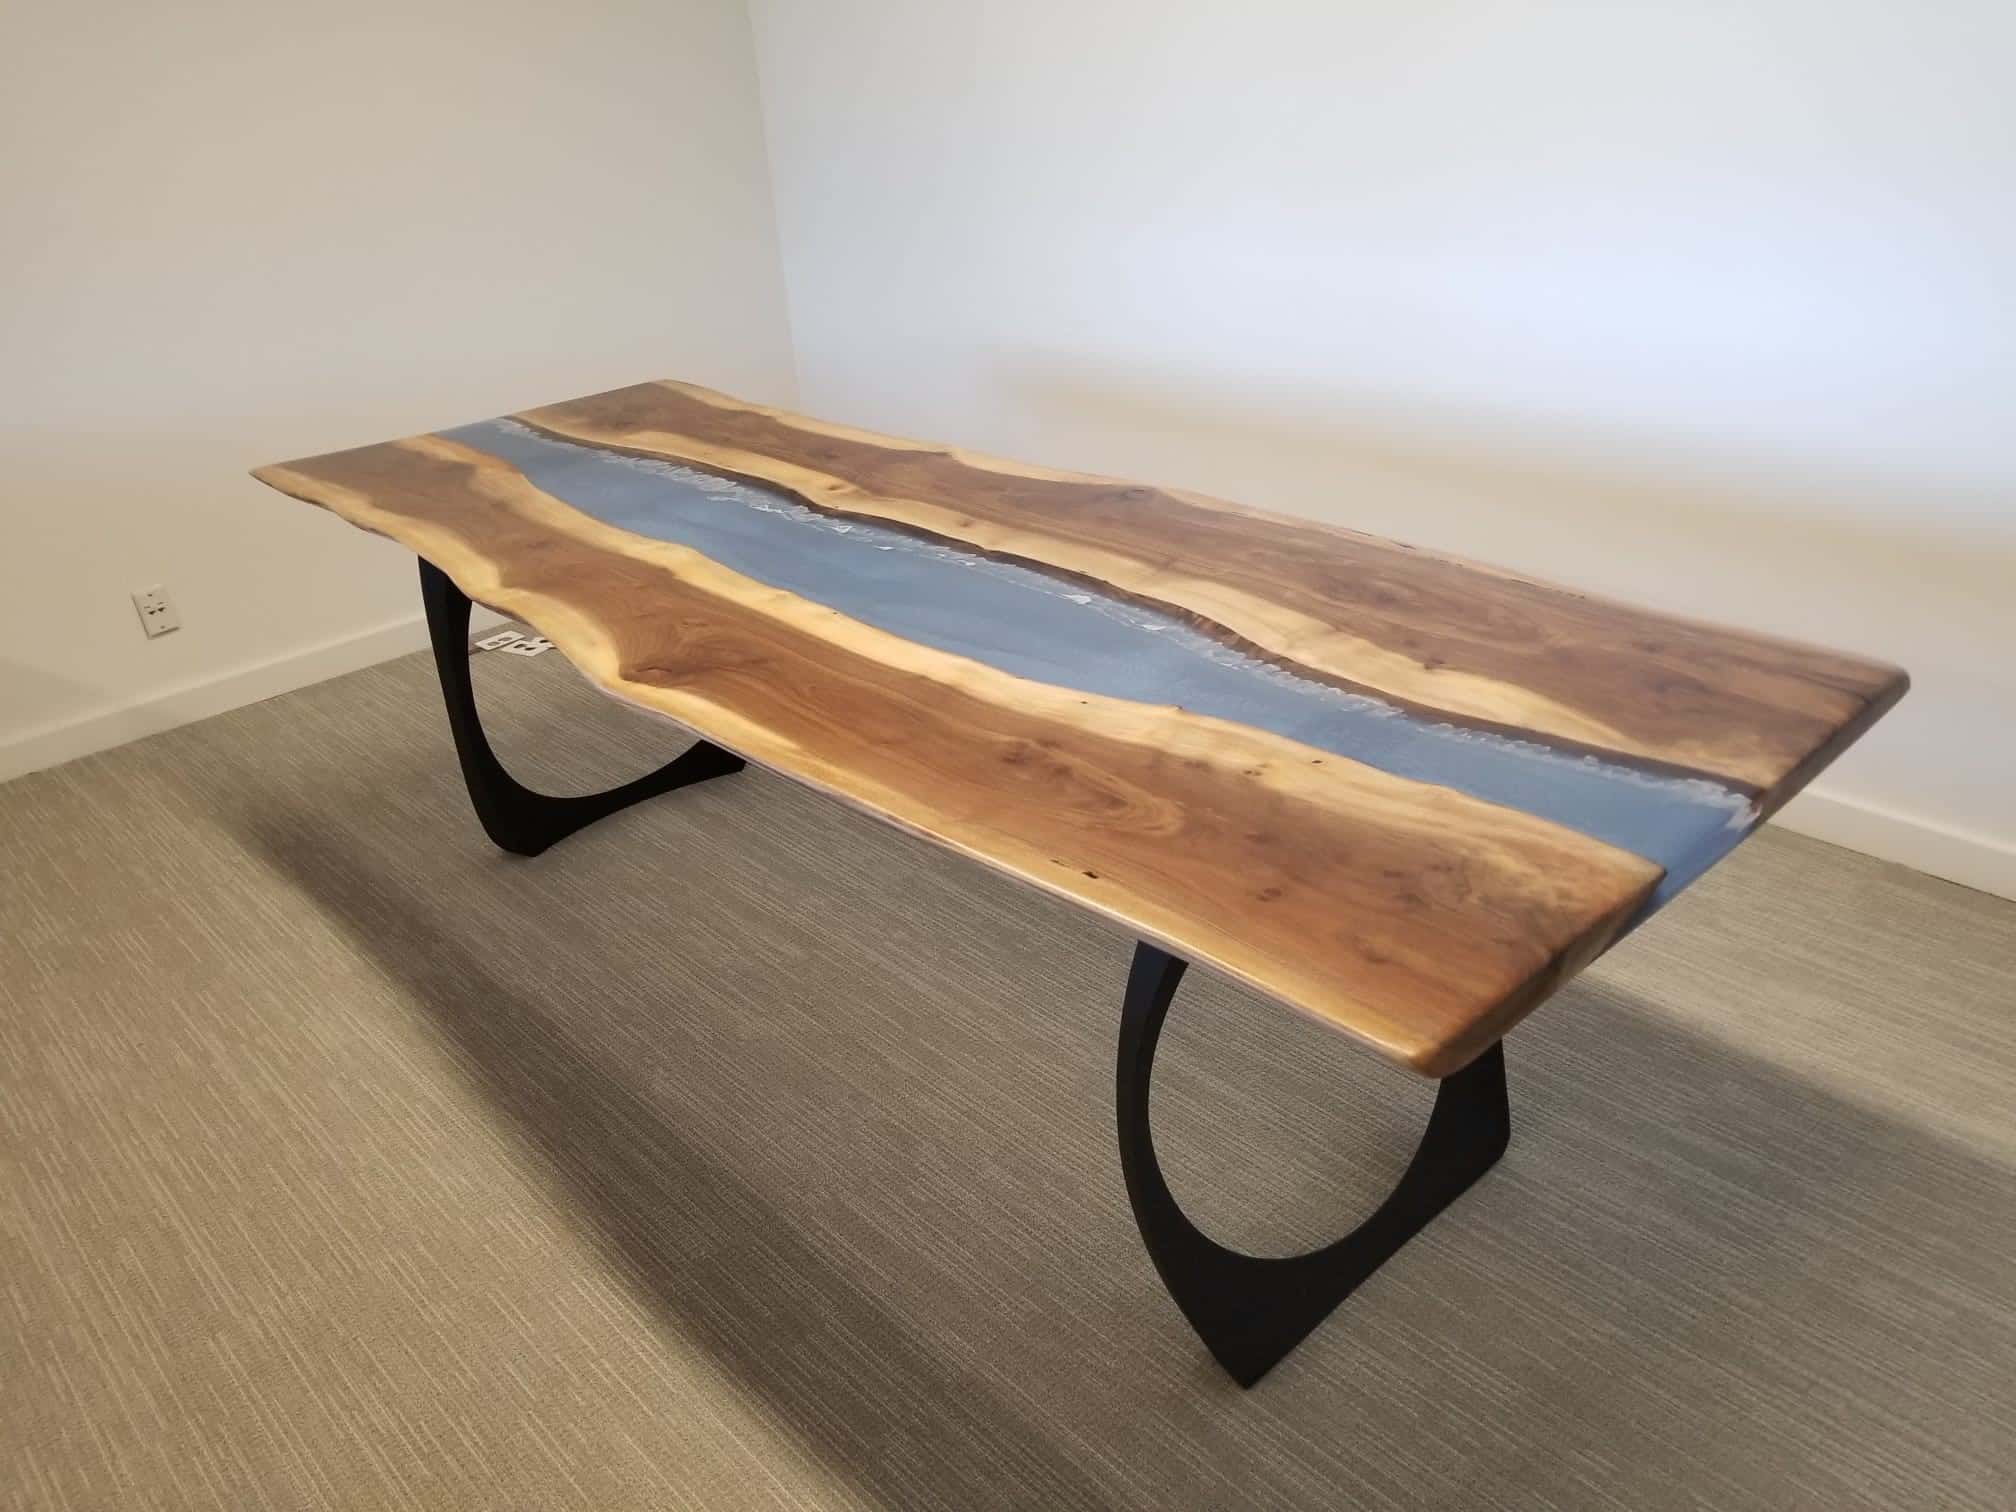 7.5' x 42 Walnut Epoxy River Table with Emerald Green / Blue Epoxy in  Voids and Cracks with Black Metal A Frame Legs - Lancaster Live Edge